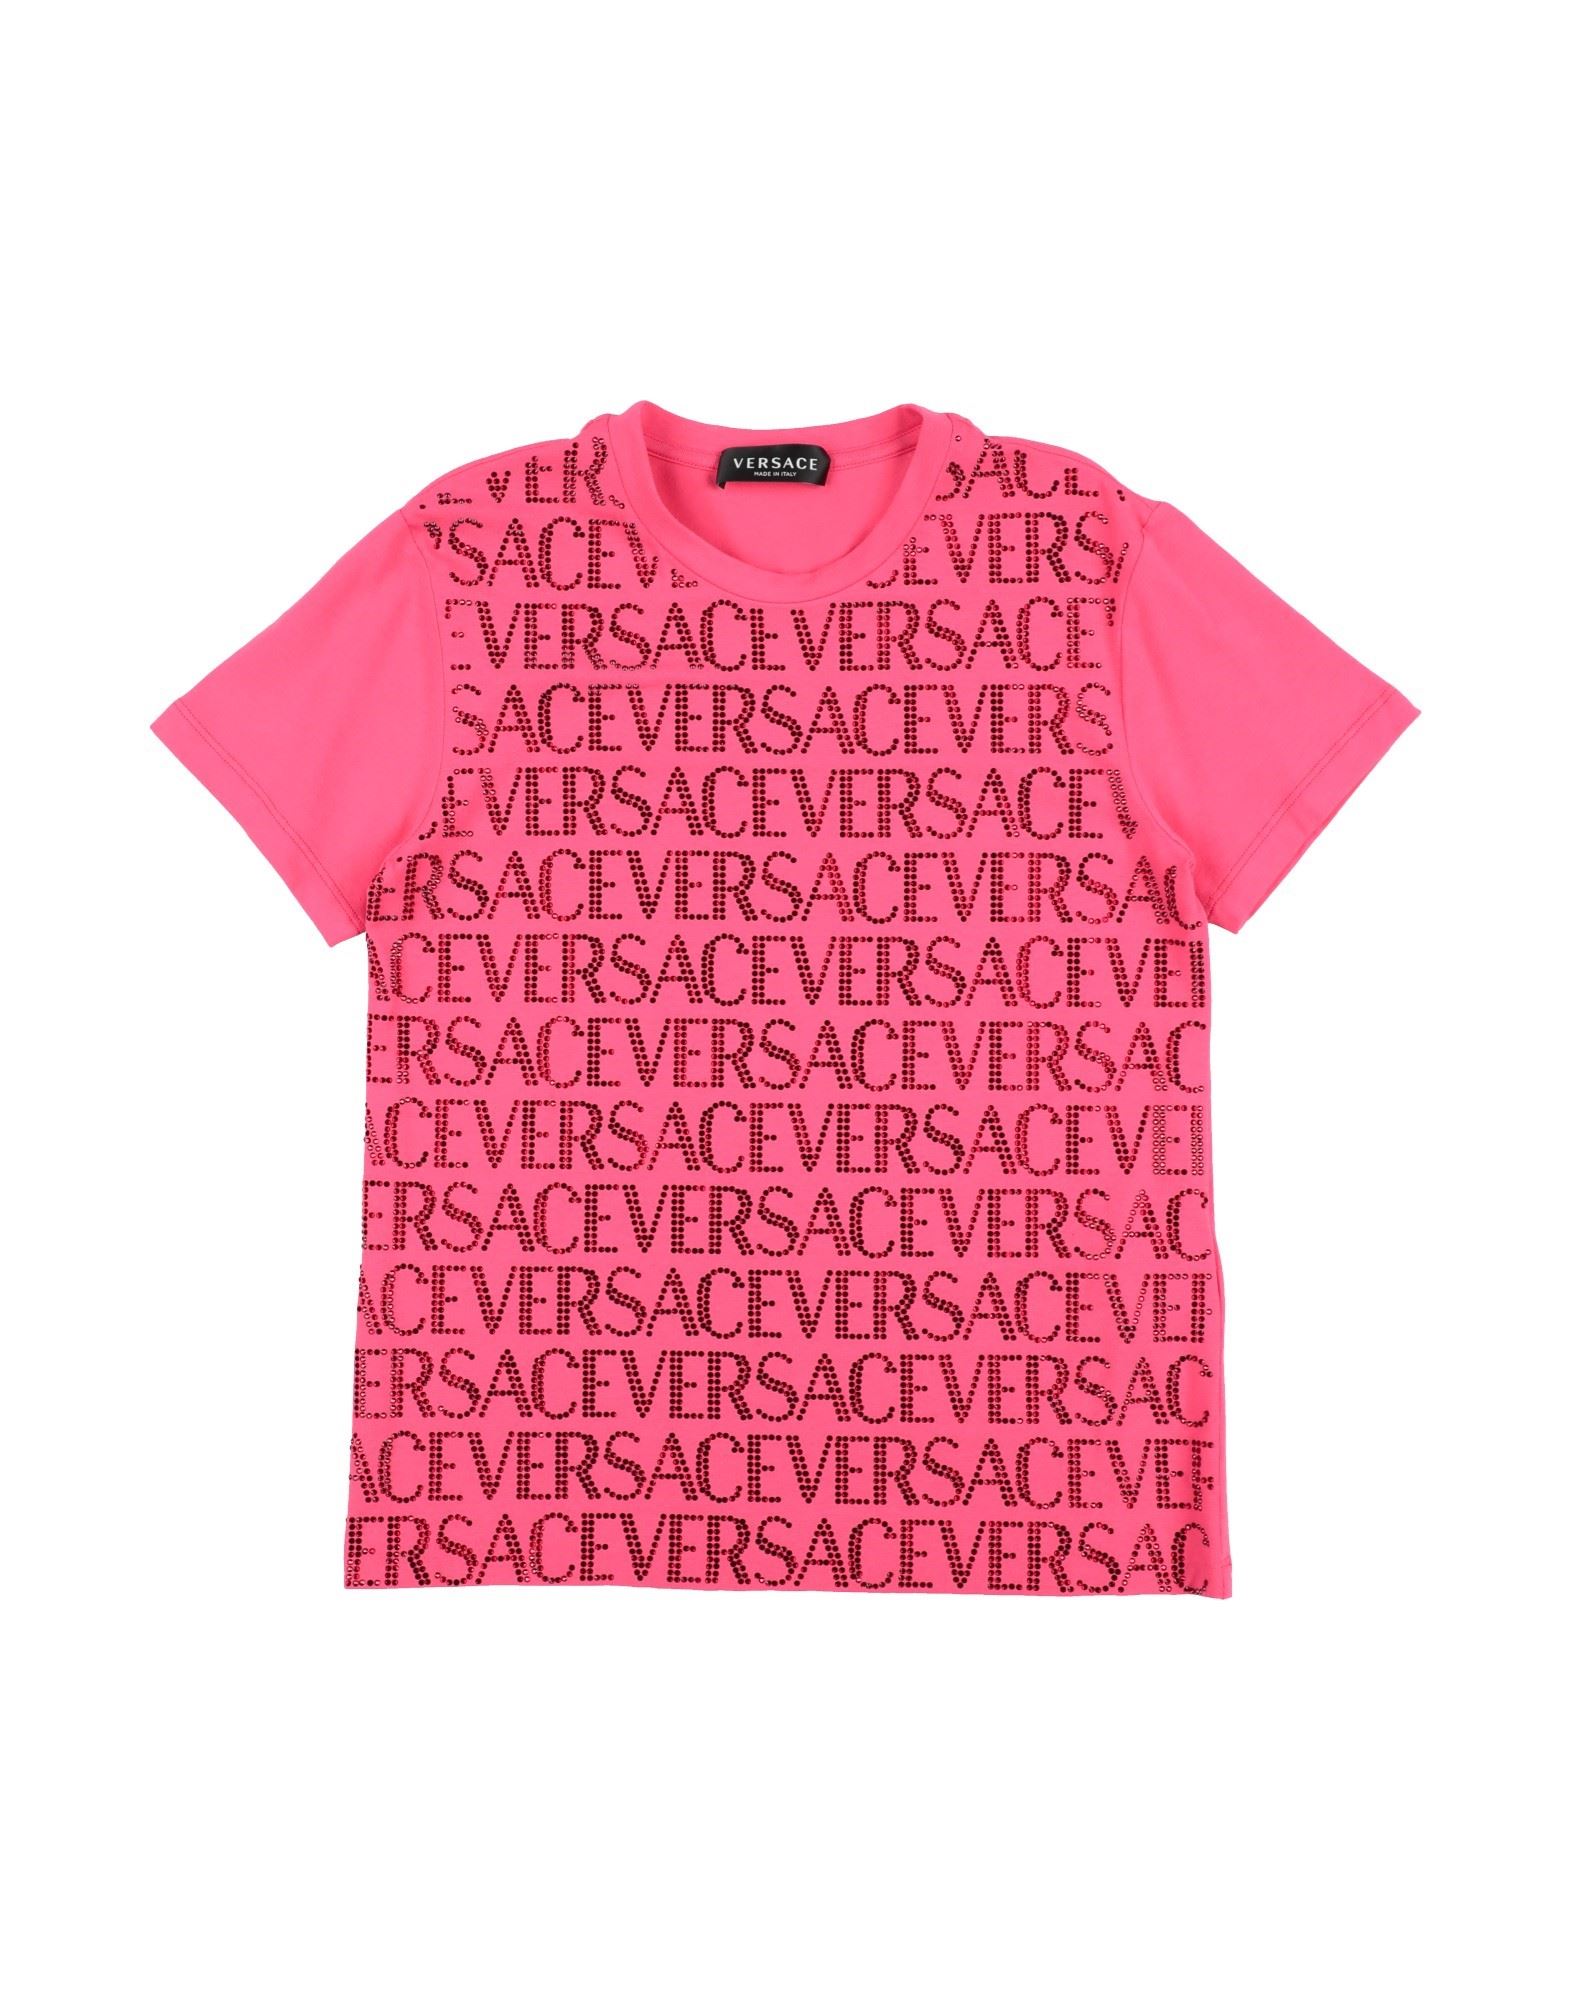 VERSACE YOUNG T-shirts Kinder Fuchsia von VERSACE YOUNG